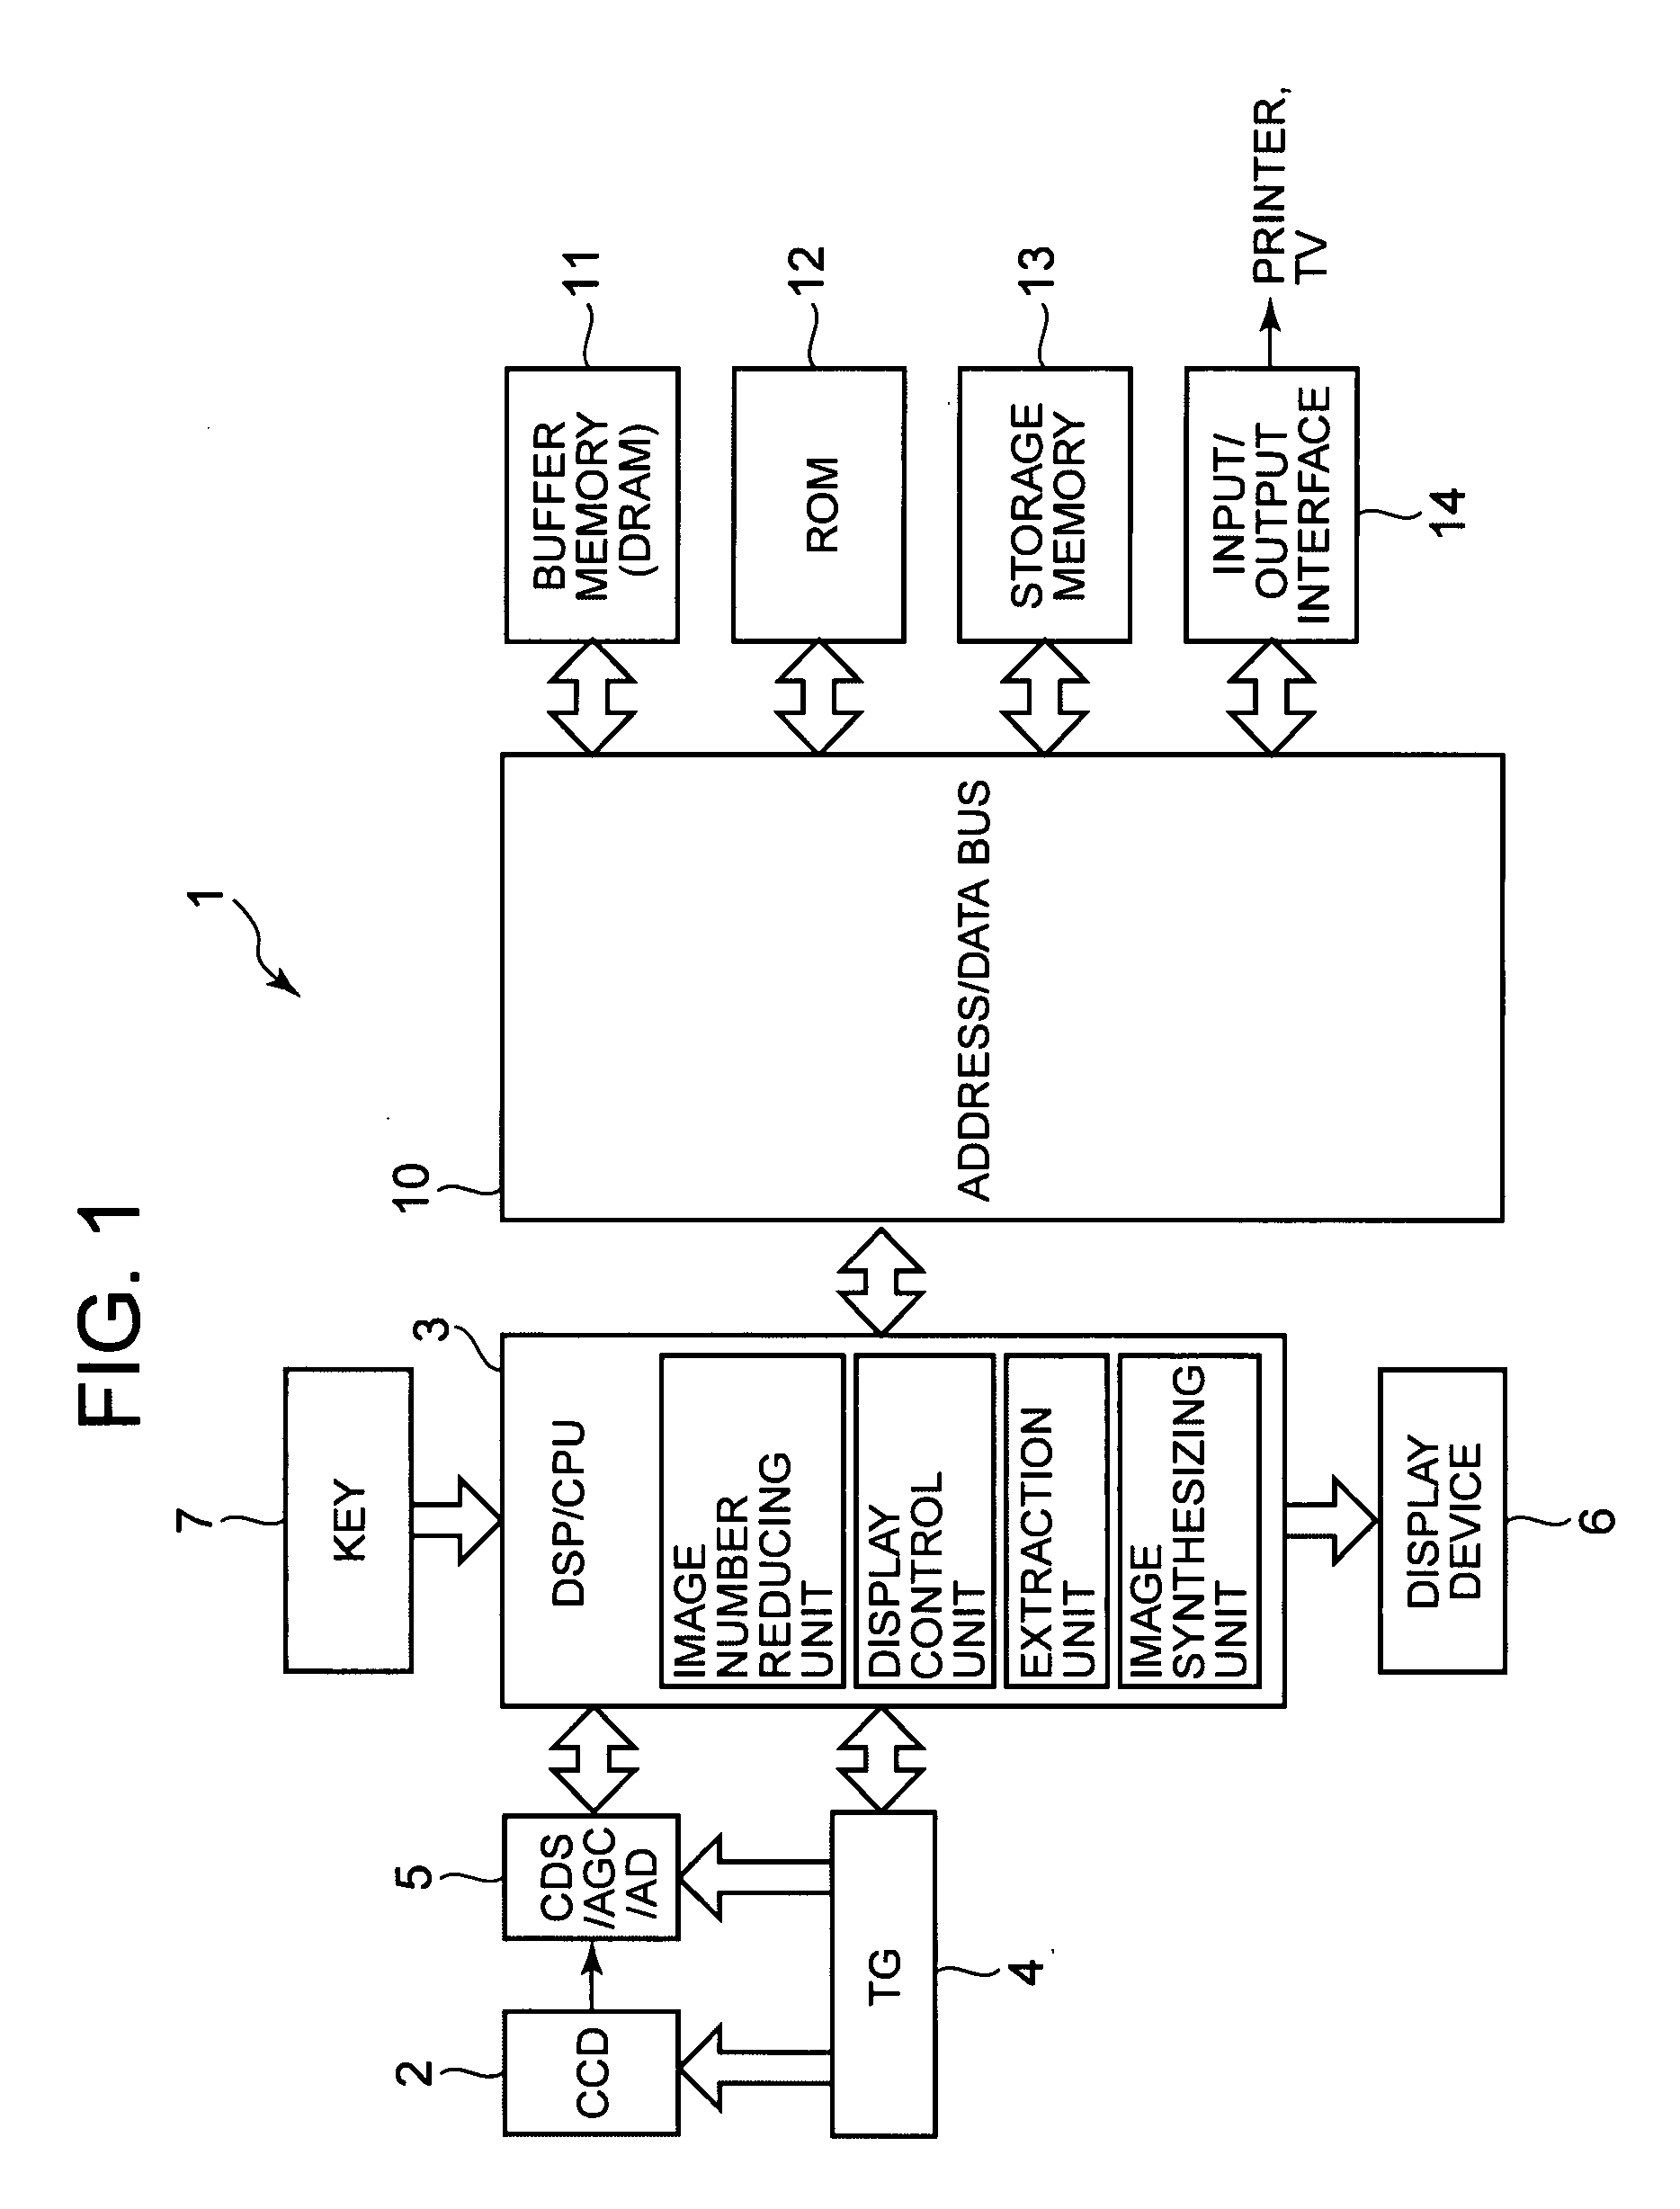 Image pickup device having quickview display function